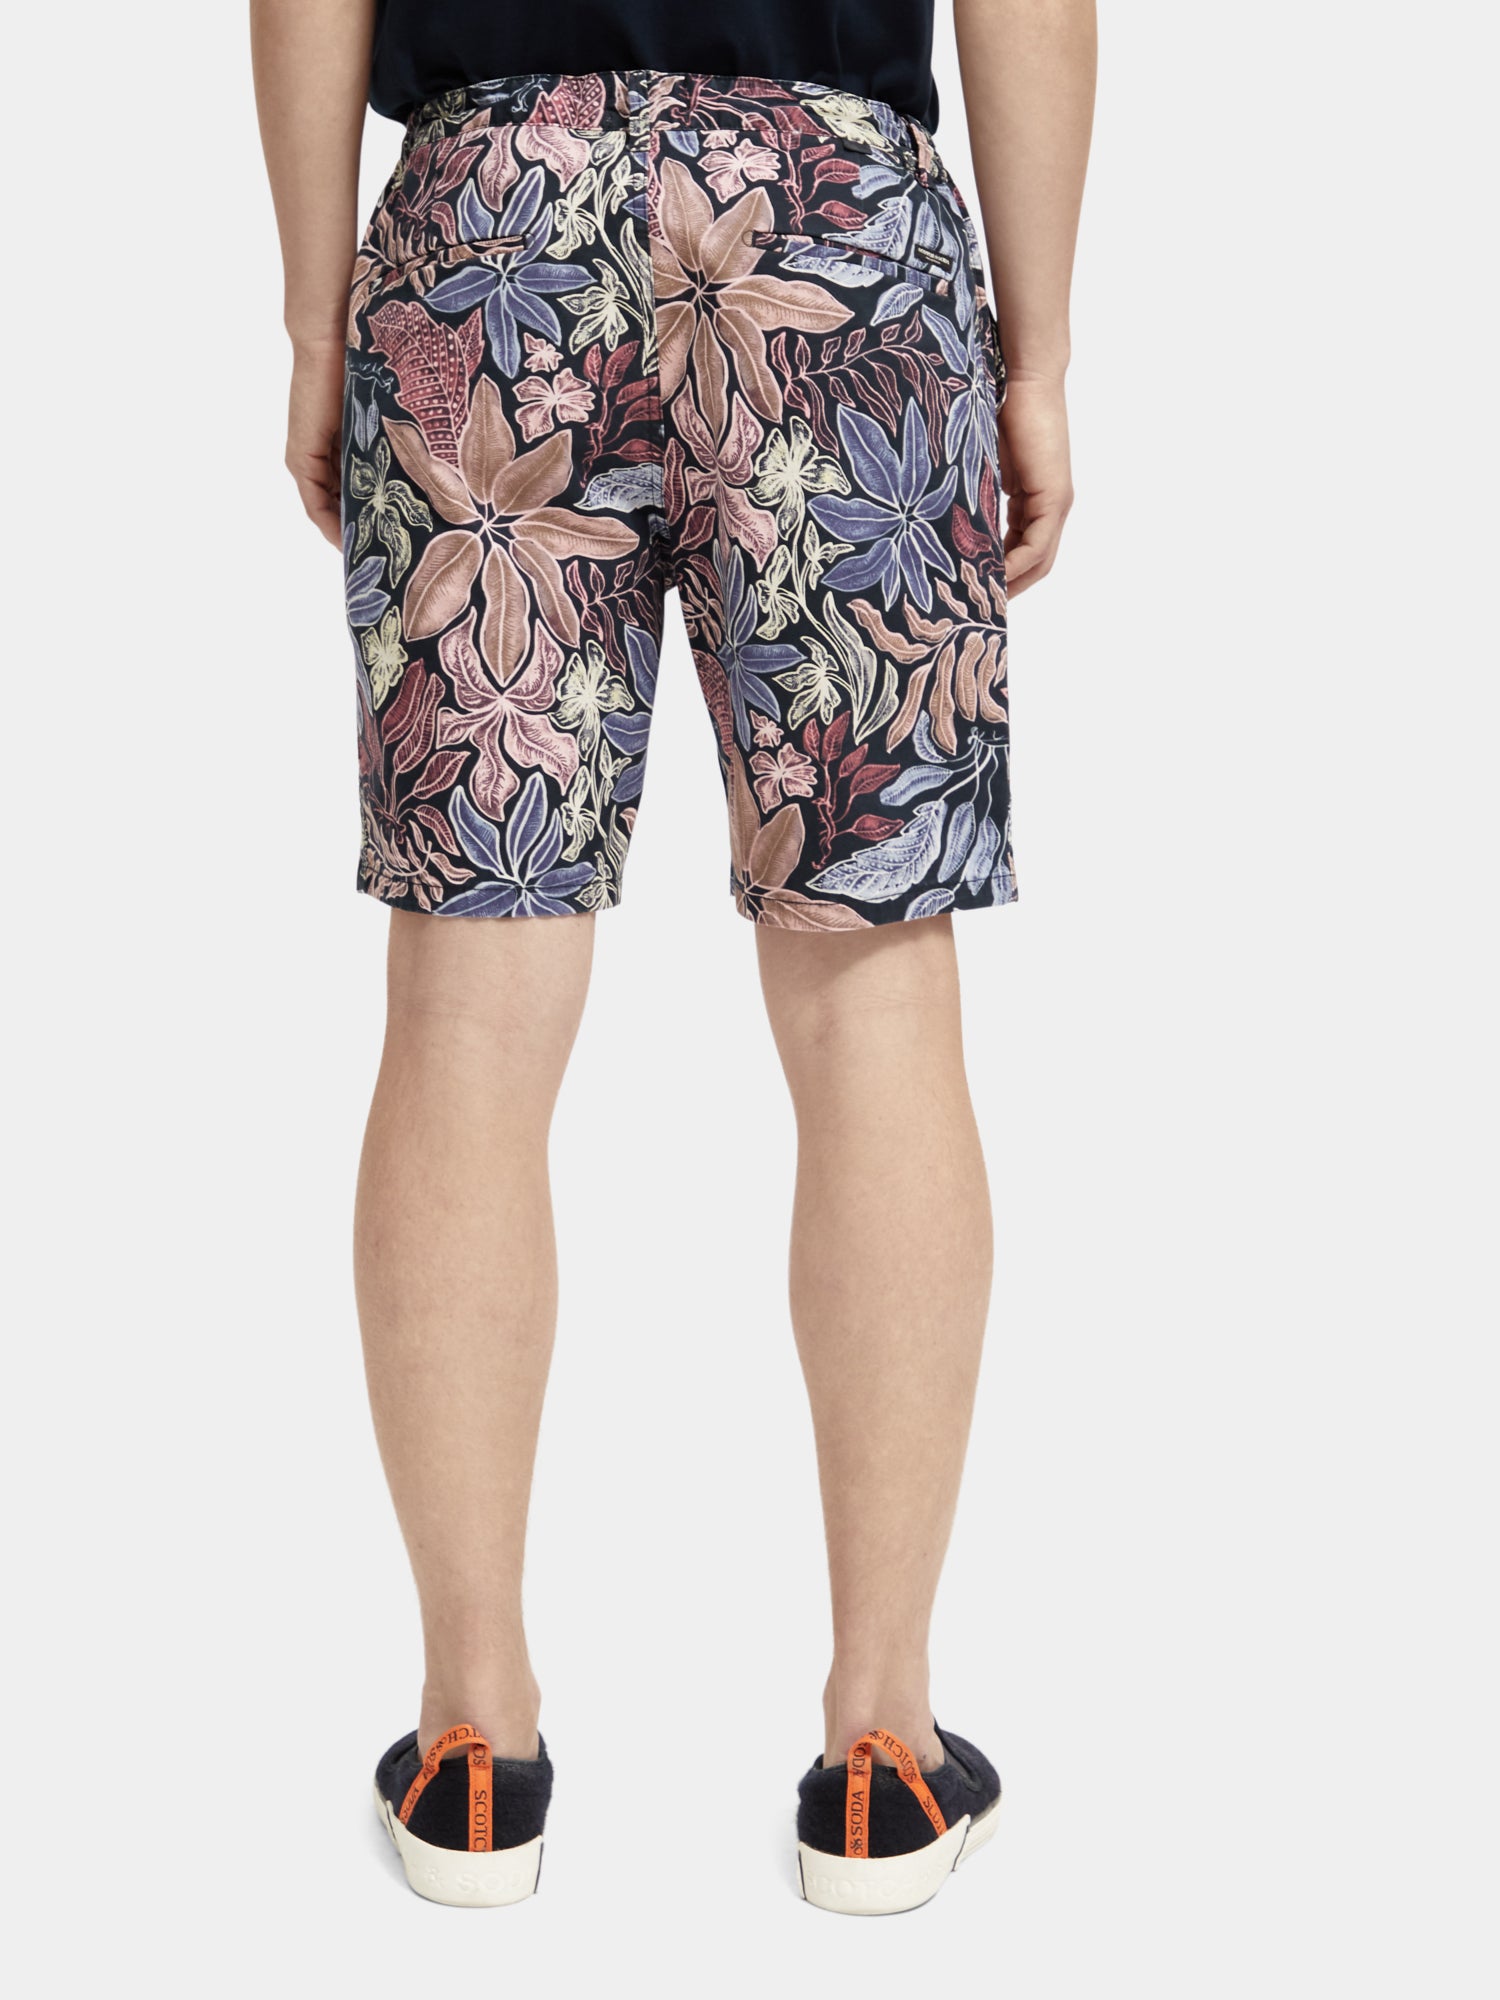 Fave printed twill shorts - Nocturnal Floral Multi